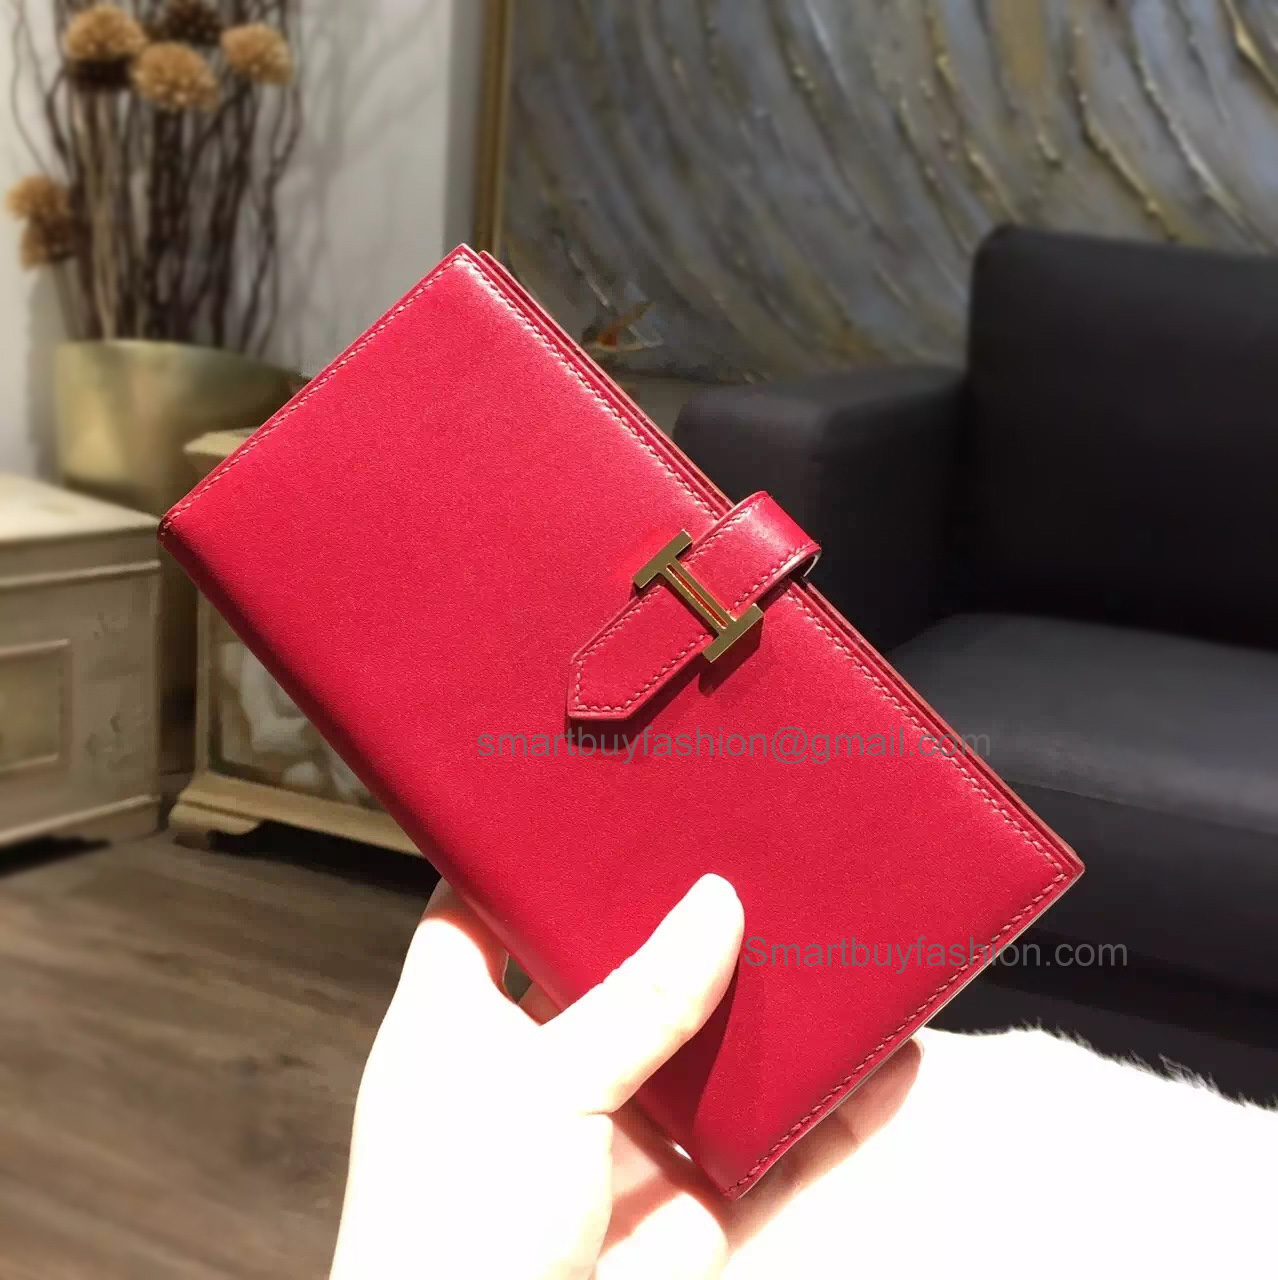 Hermes Bearn Wallet Hand Stitched in ck55 Rouge Box Calfskin GHW